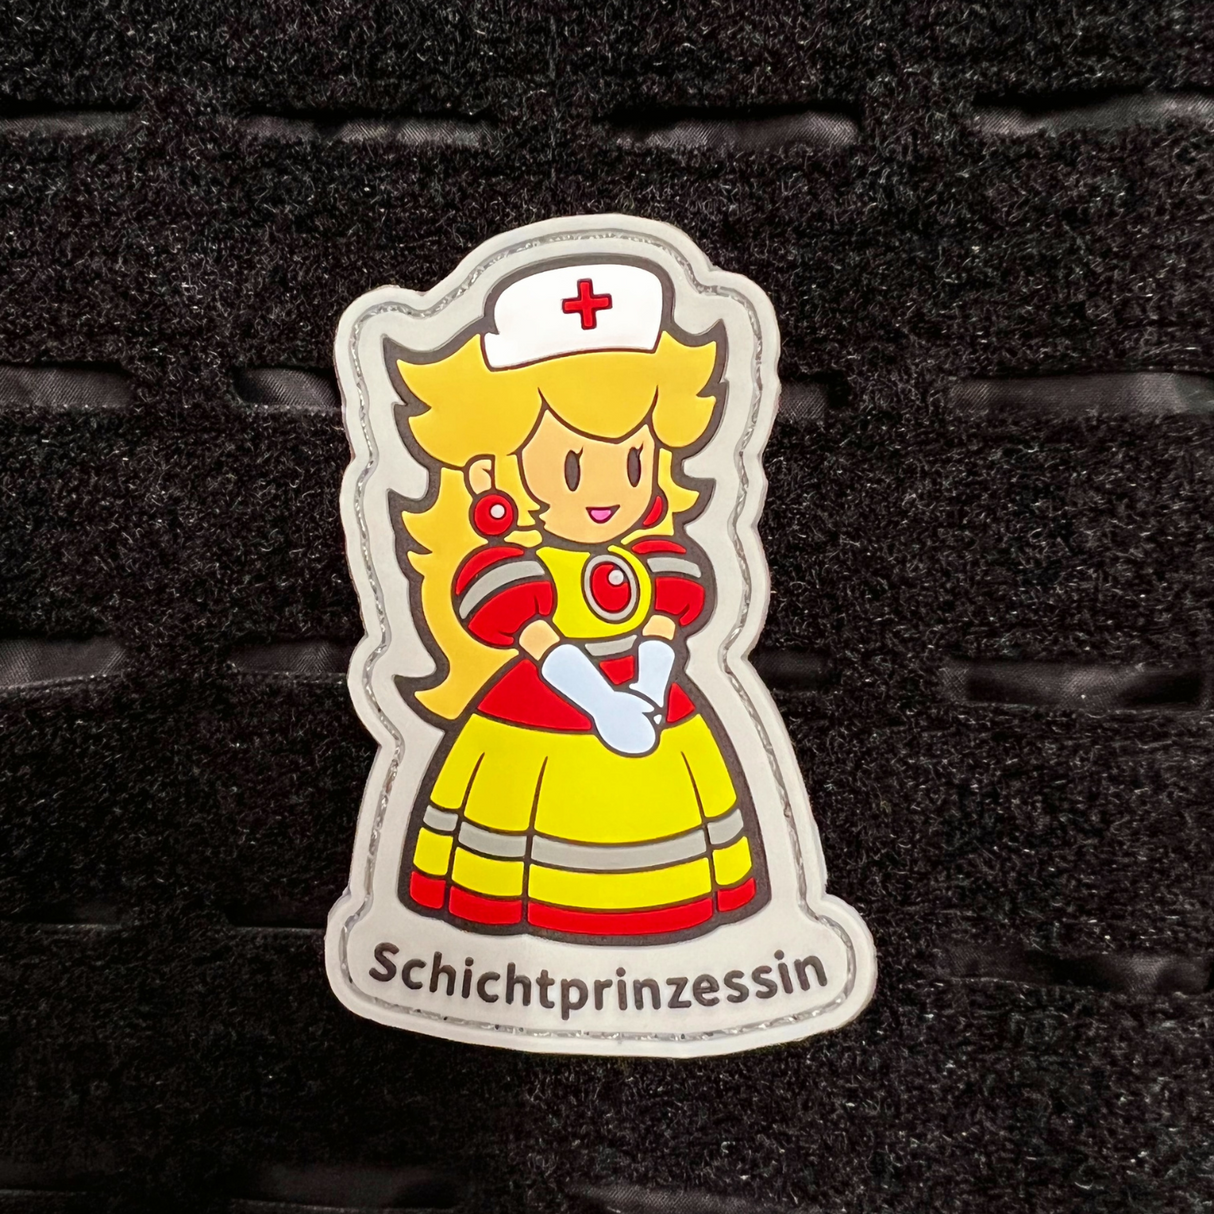 Shift Princess of the Rescue Rubber Patch